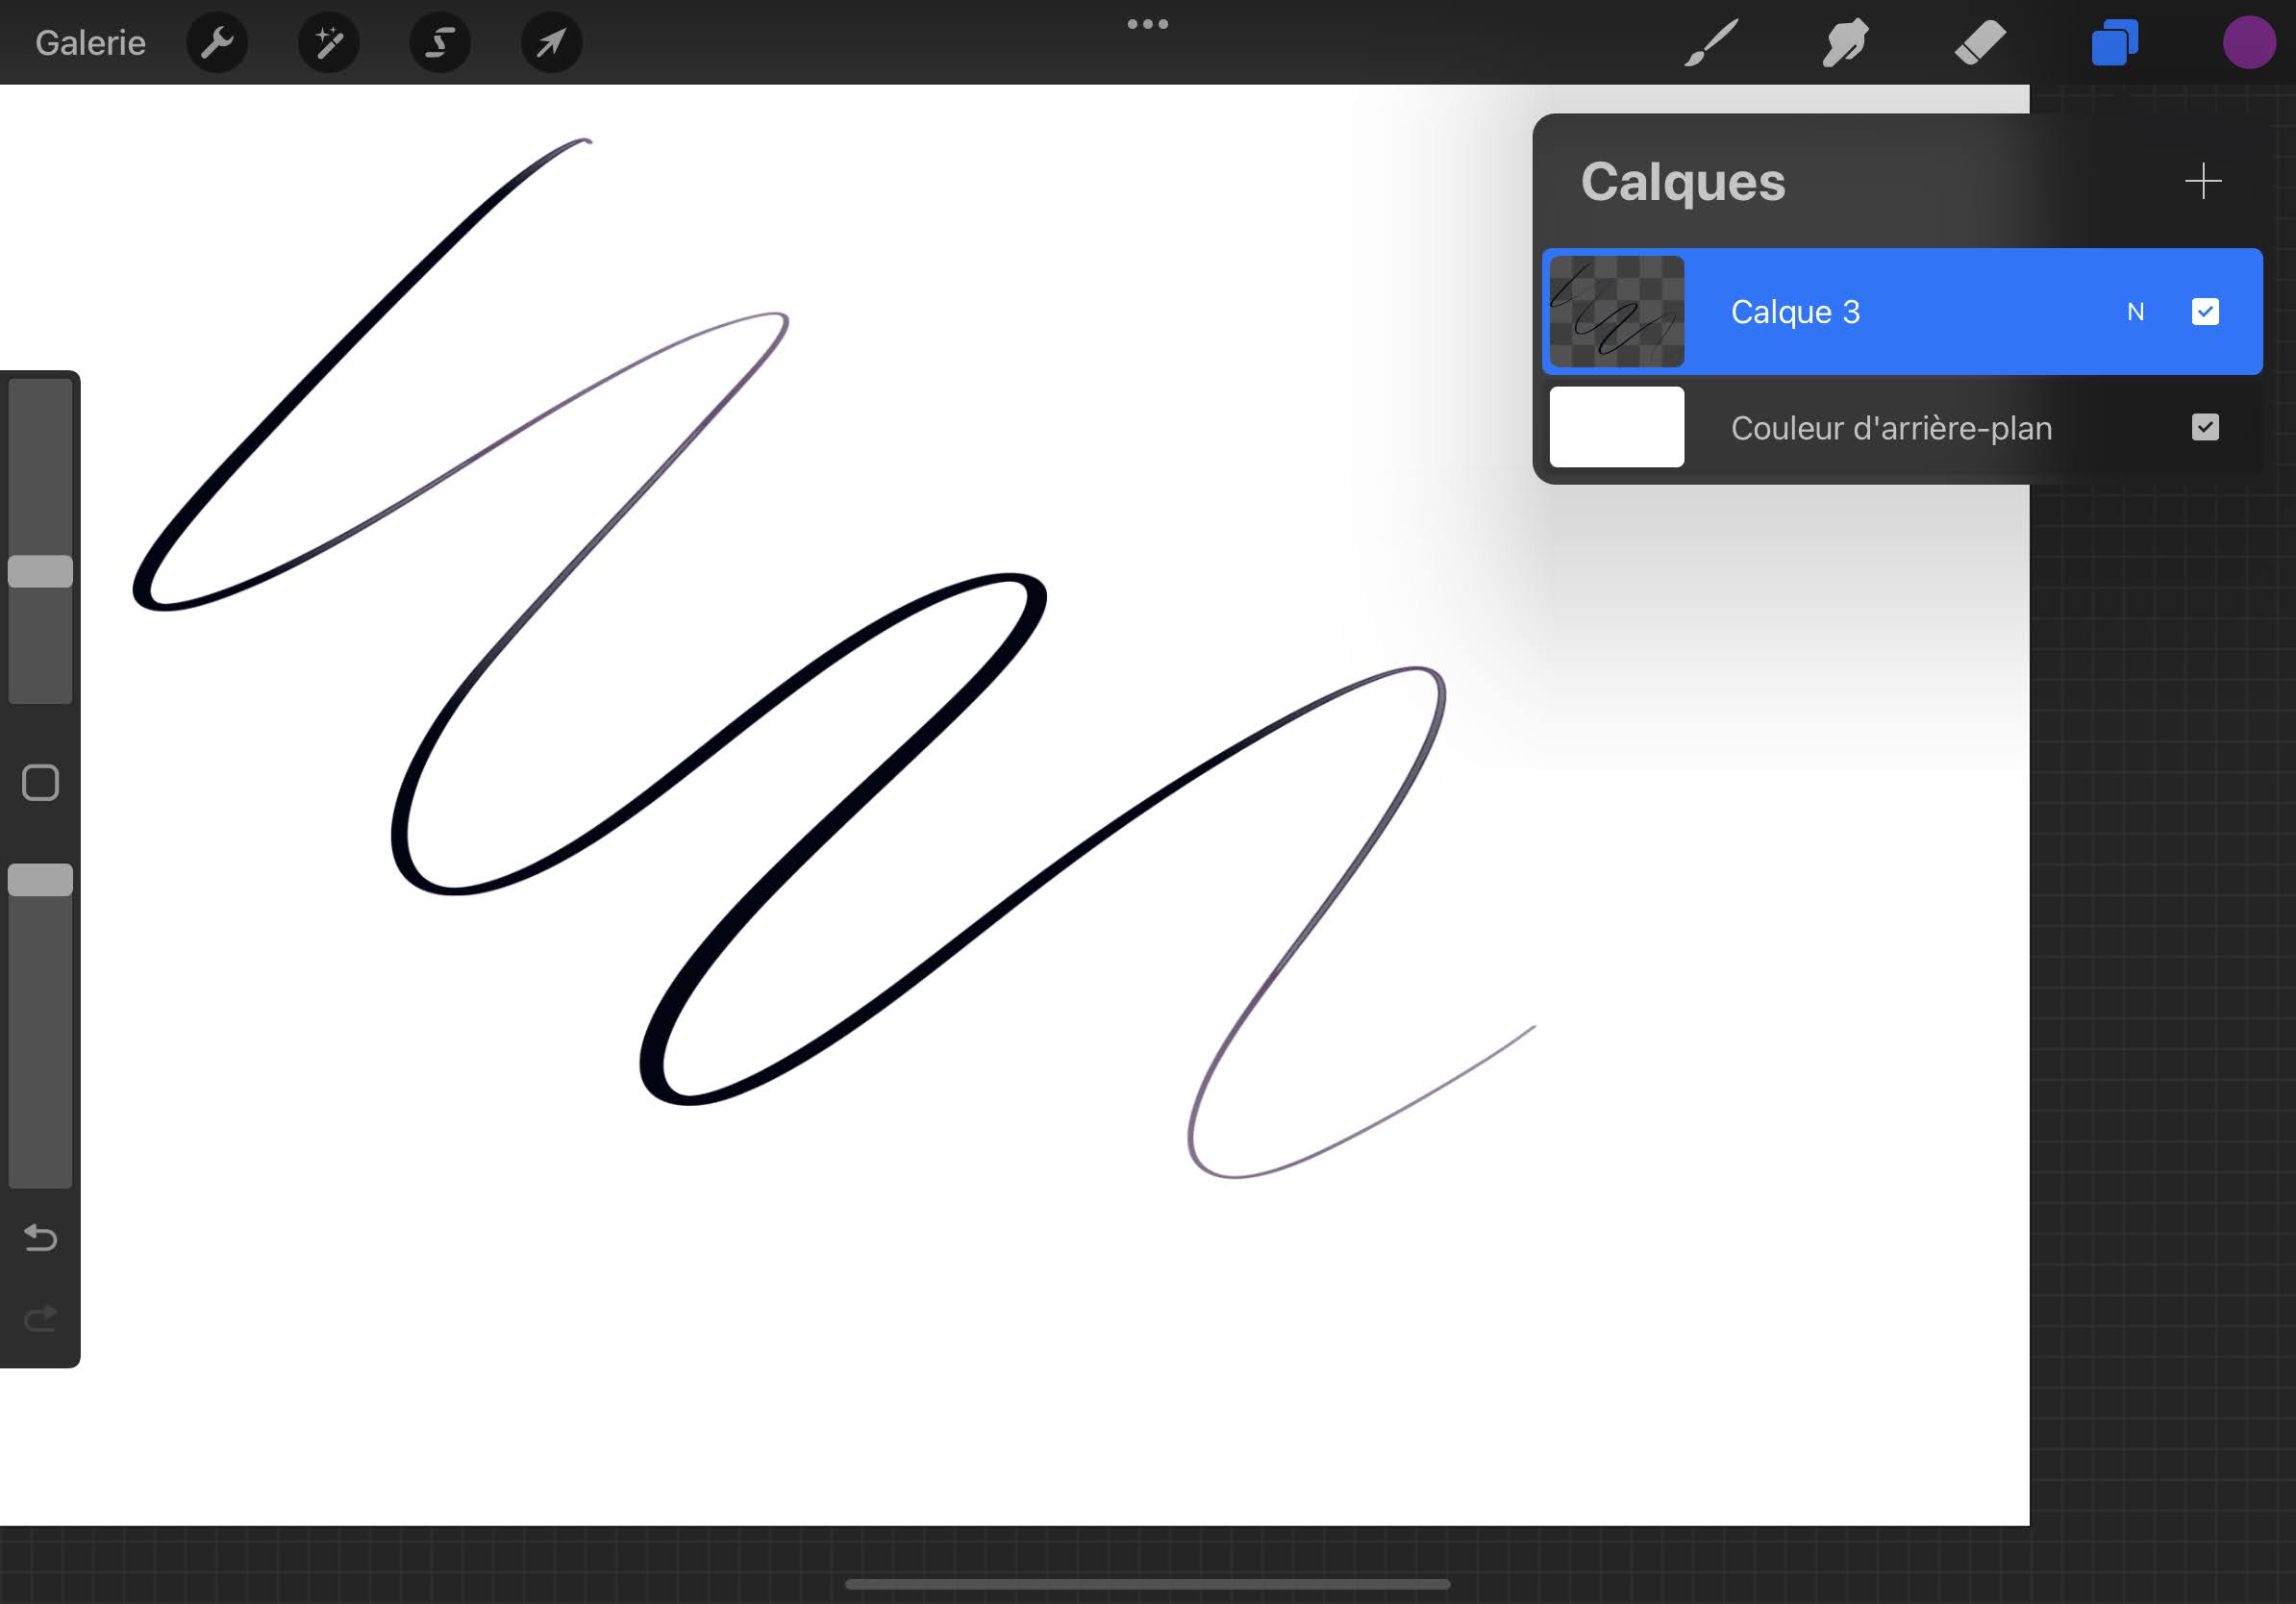 How to recolor a line in Procreate?